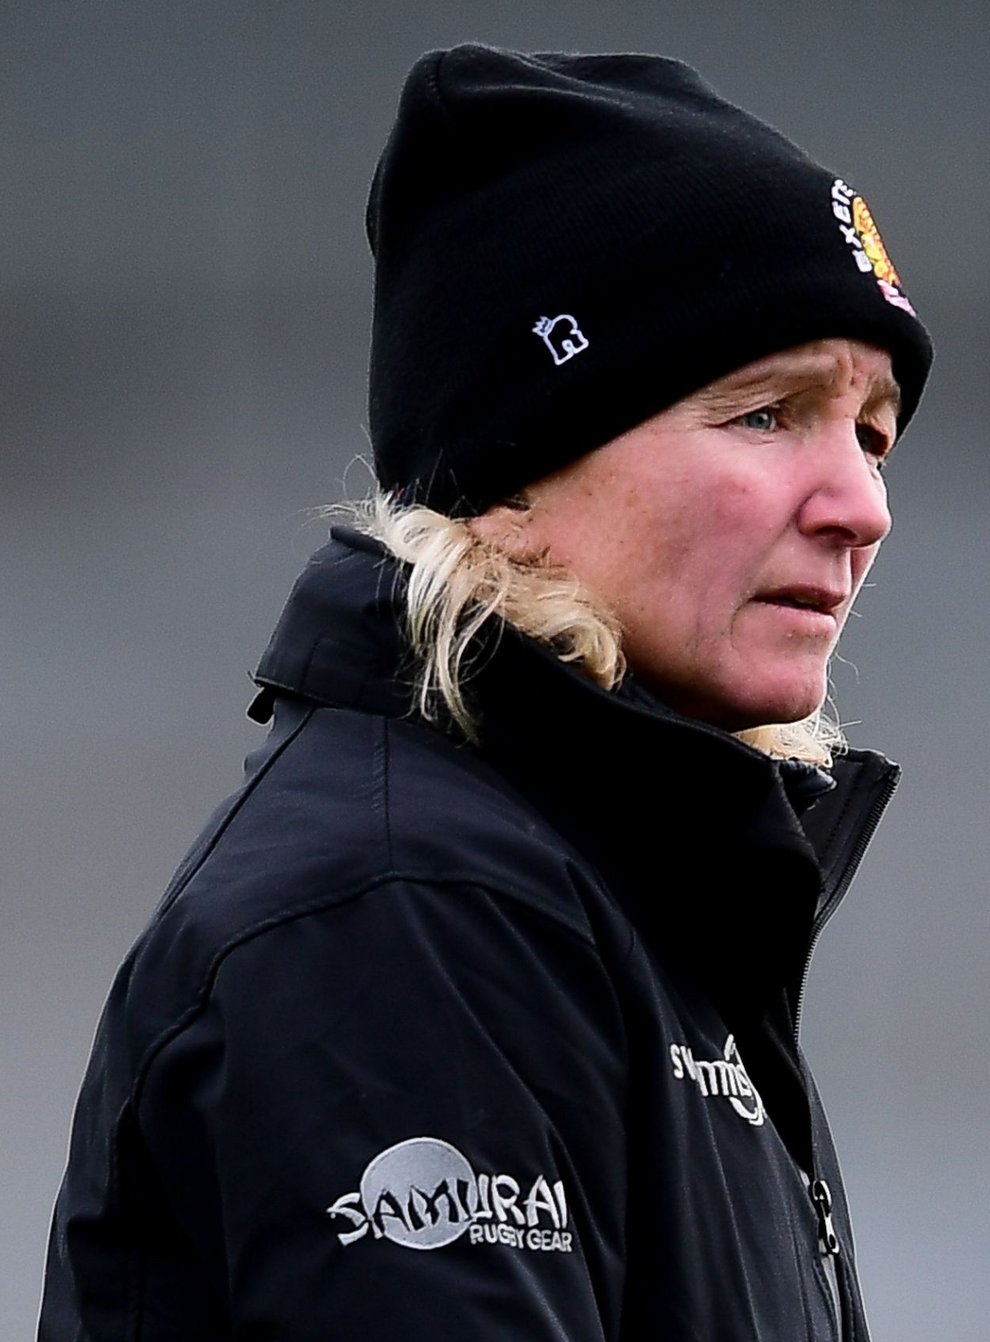 Appleby is ‘frustrated’ with her side